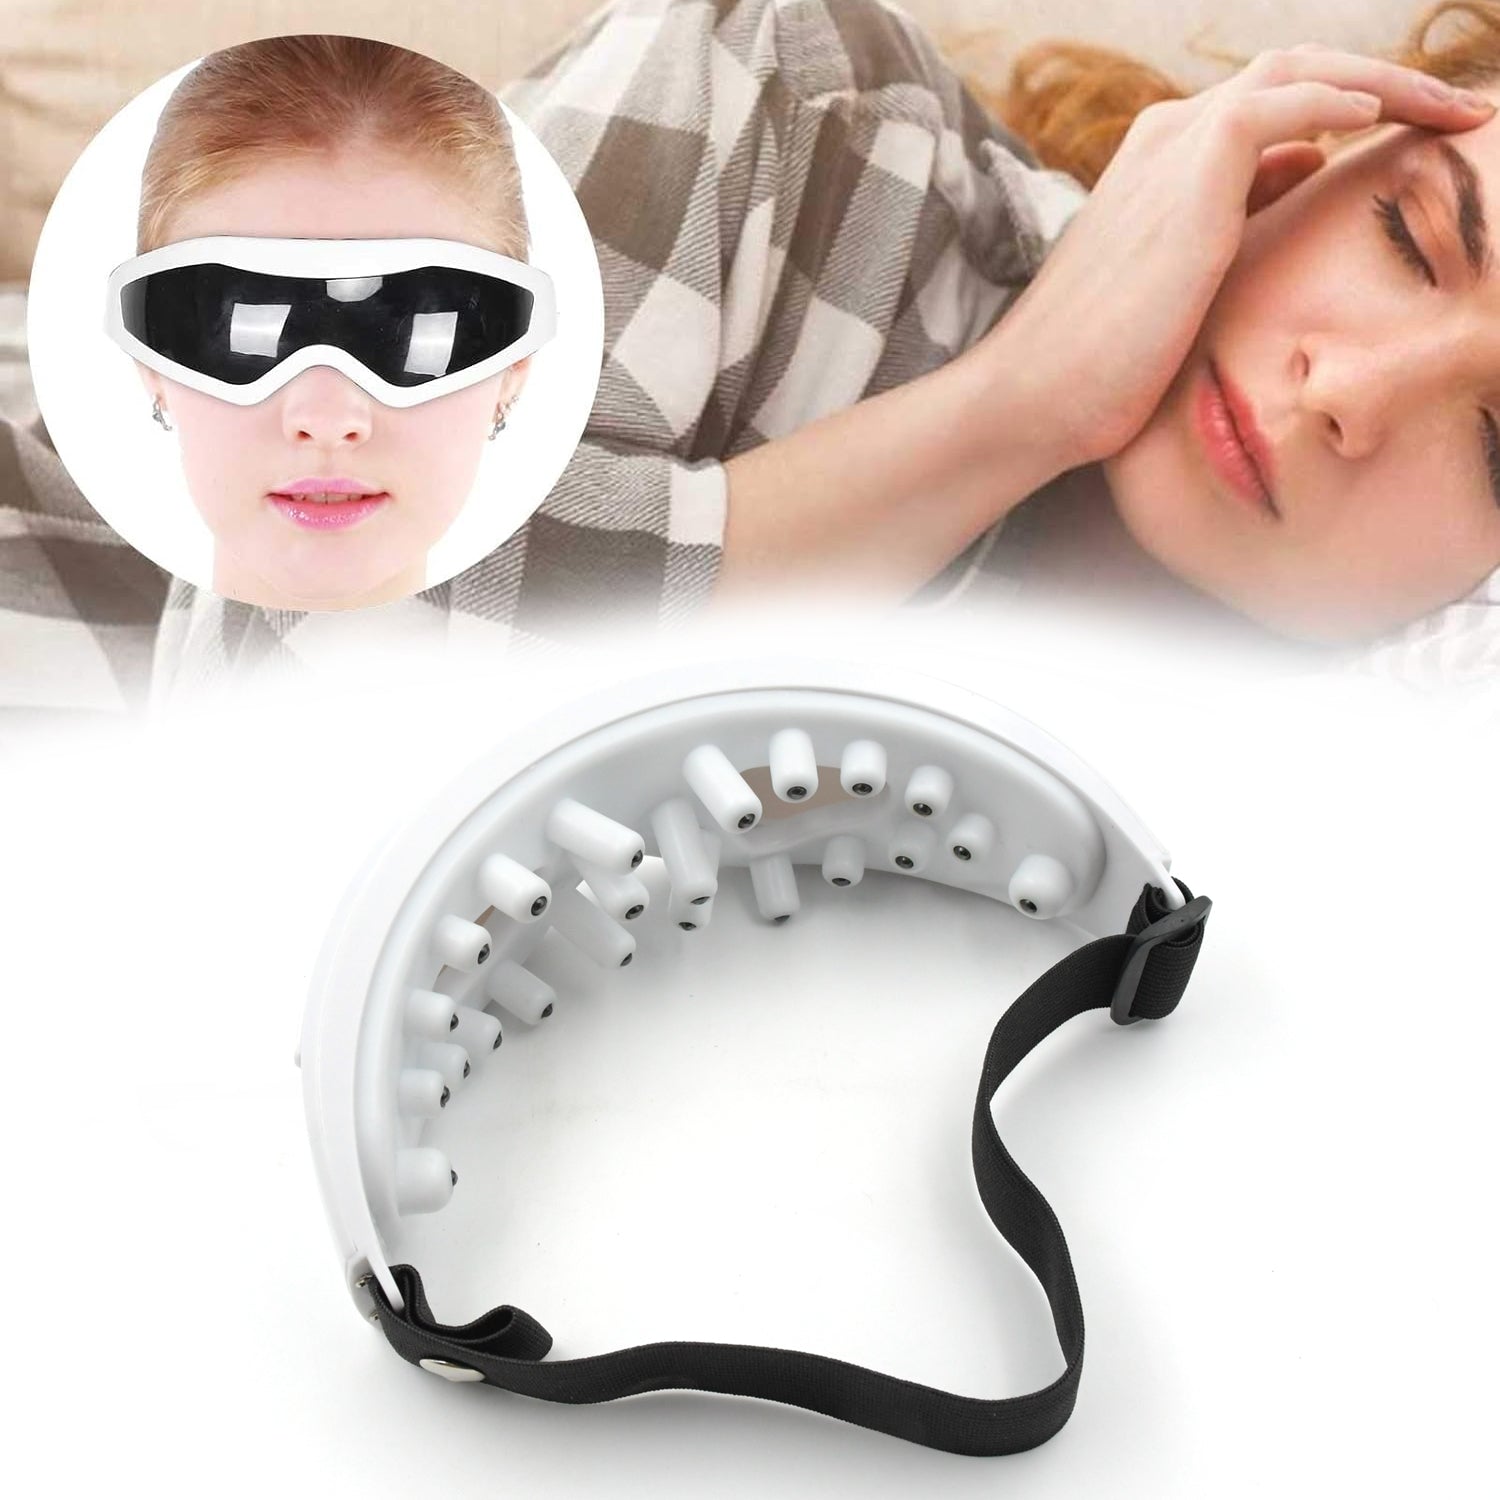 1351 Electric Eye Massager Dark Circles Dry Eyes Eye Bag Eye Relief Vibration Magnet Therapy Eye Care Massage Device with Adjustable Elastic Band for Improving Sleep